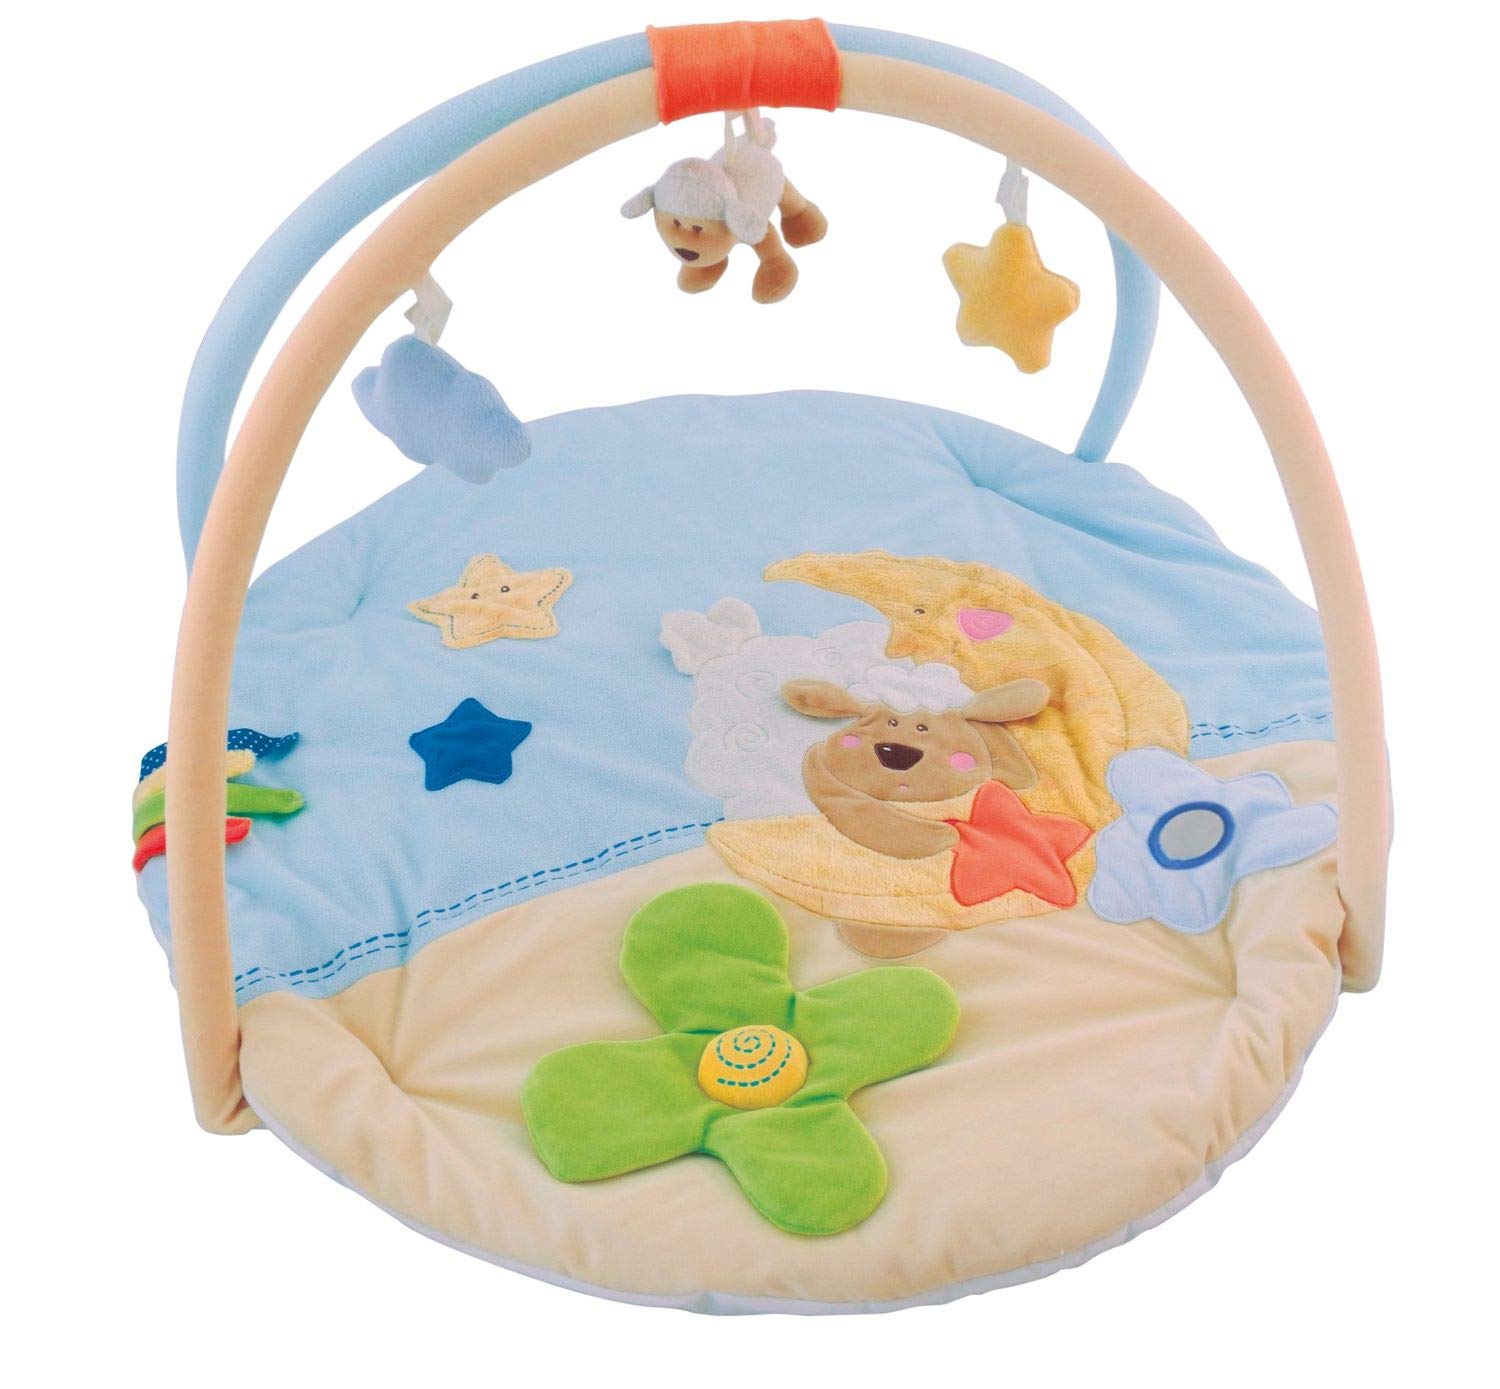 Bieco Baby Activity Blanket, Baby Blanket with Play Arch, Diameter Approx. 90 cm.